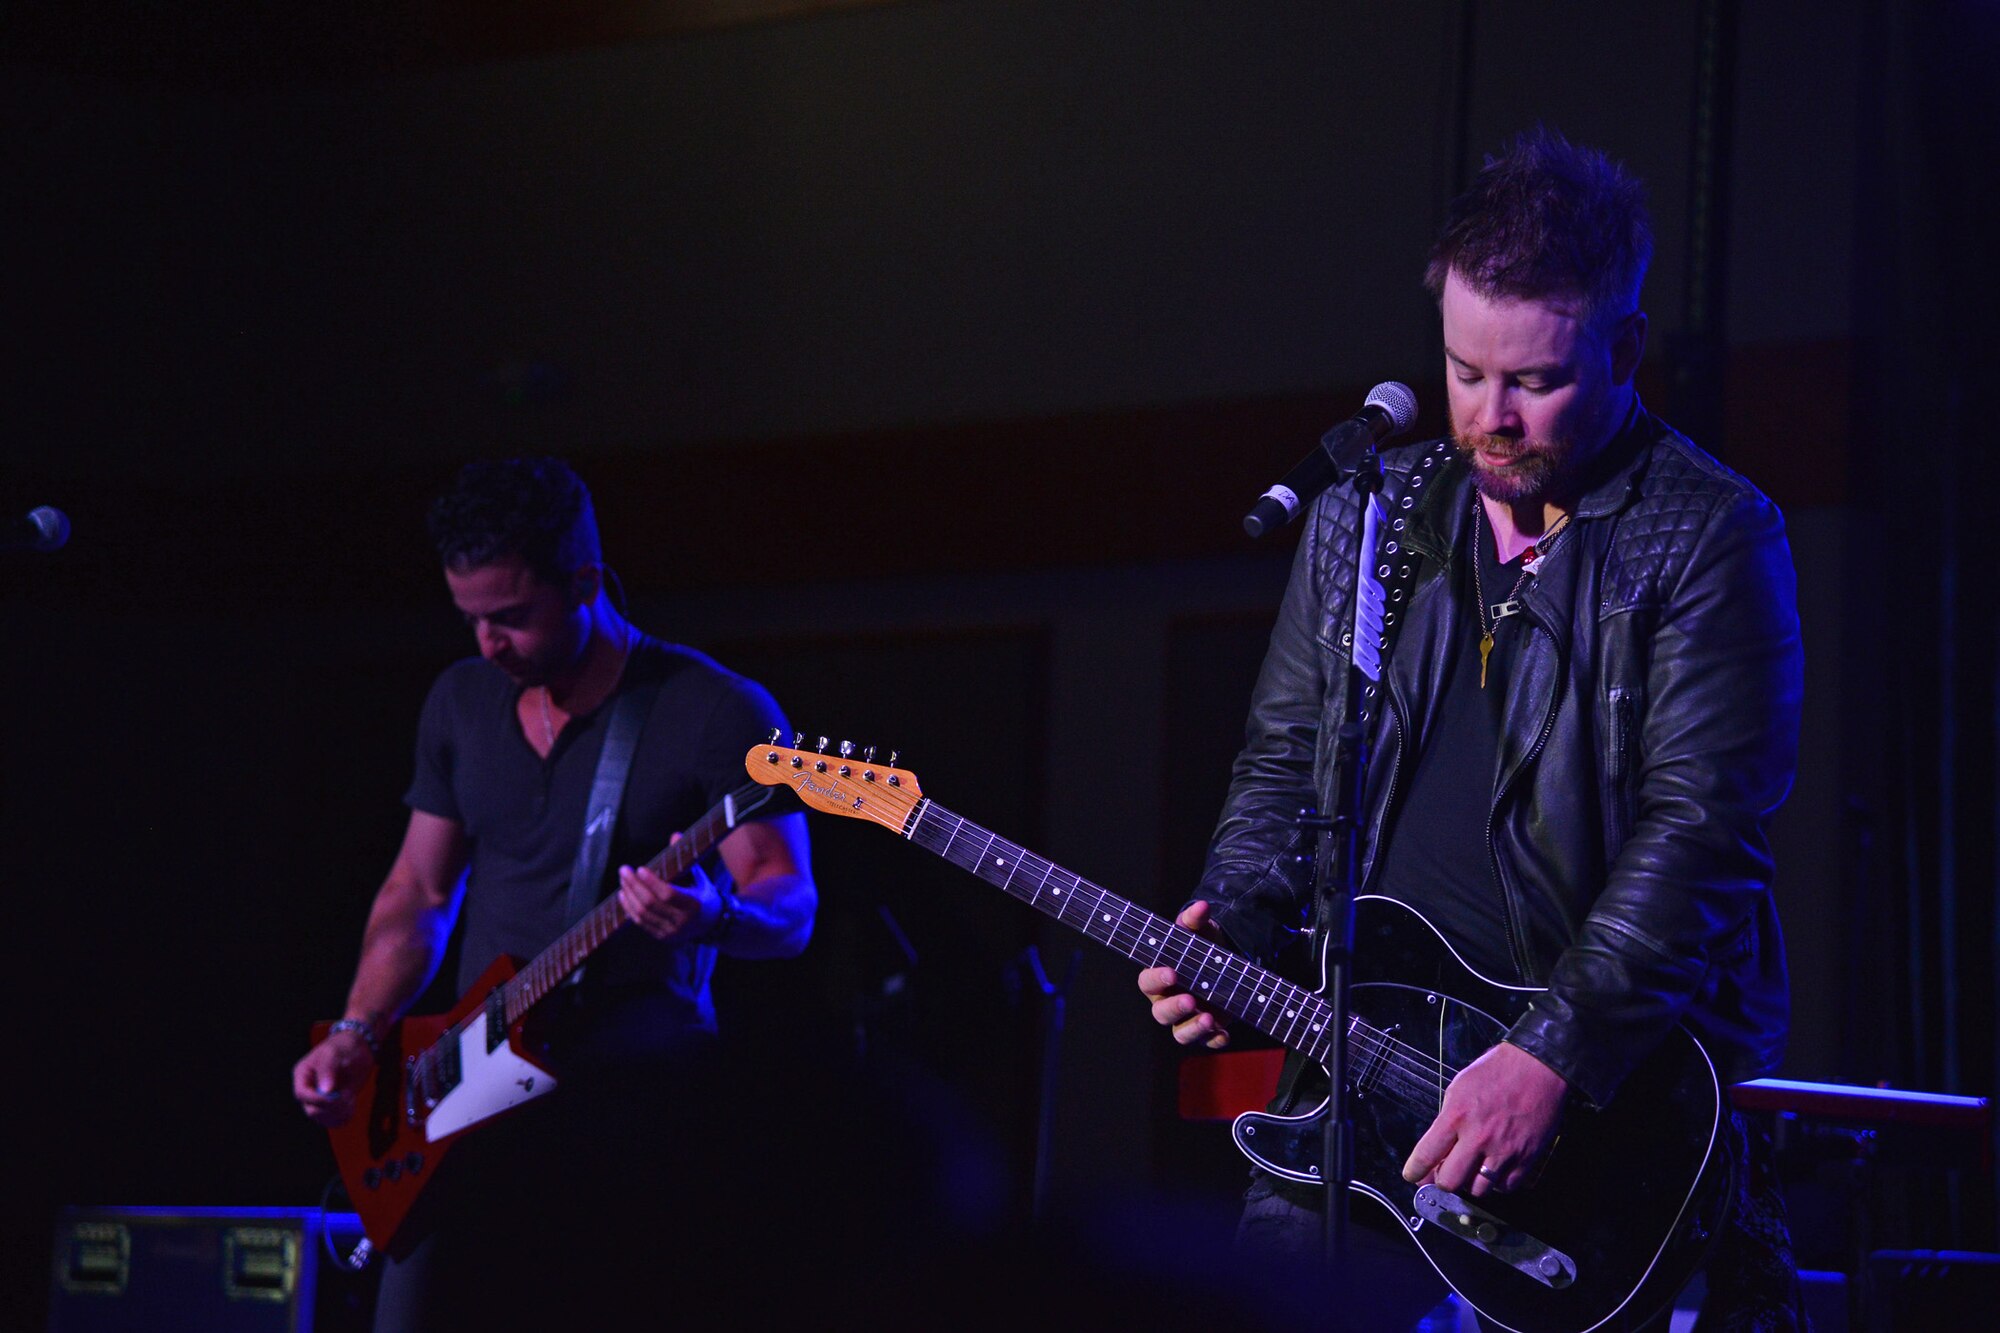 Nashville singer-songwriter David Cook, helped Malmstrom kick off the Memorial Day weekend by performing for more than 300 Airmen and their family members at the Grizzly Bend May 28. Cook said playing for military bases helps him to understand what the military endures while protecting and serving the country. (U.S. Air Force photo/ Airman 1st Class Daniel Brosam)